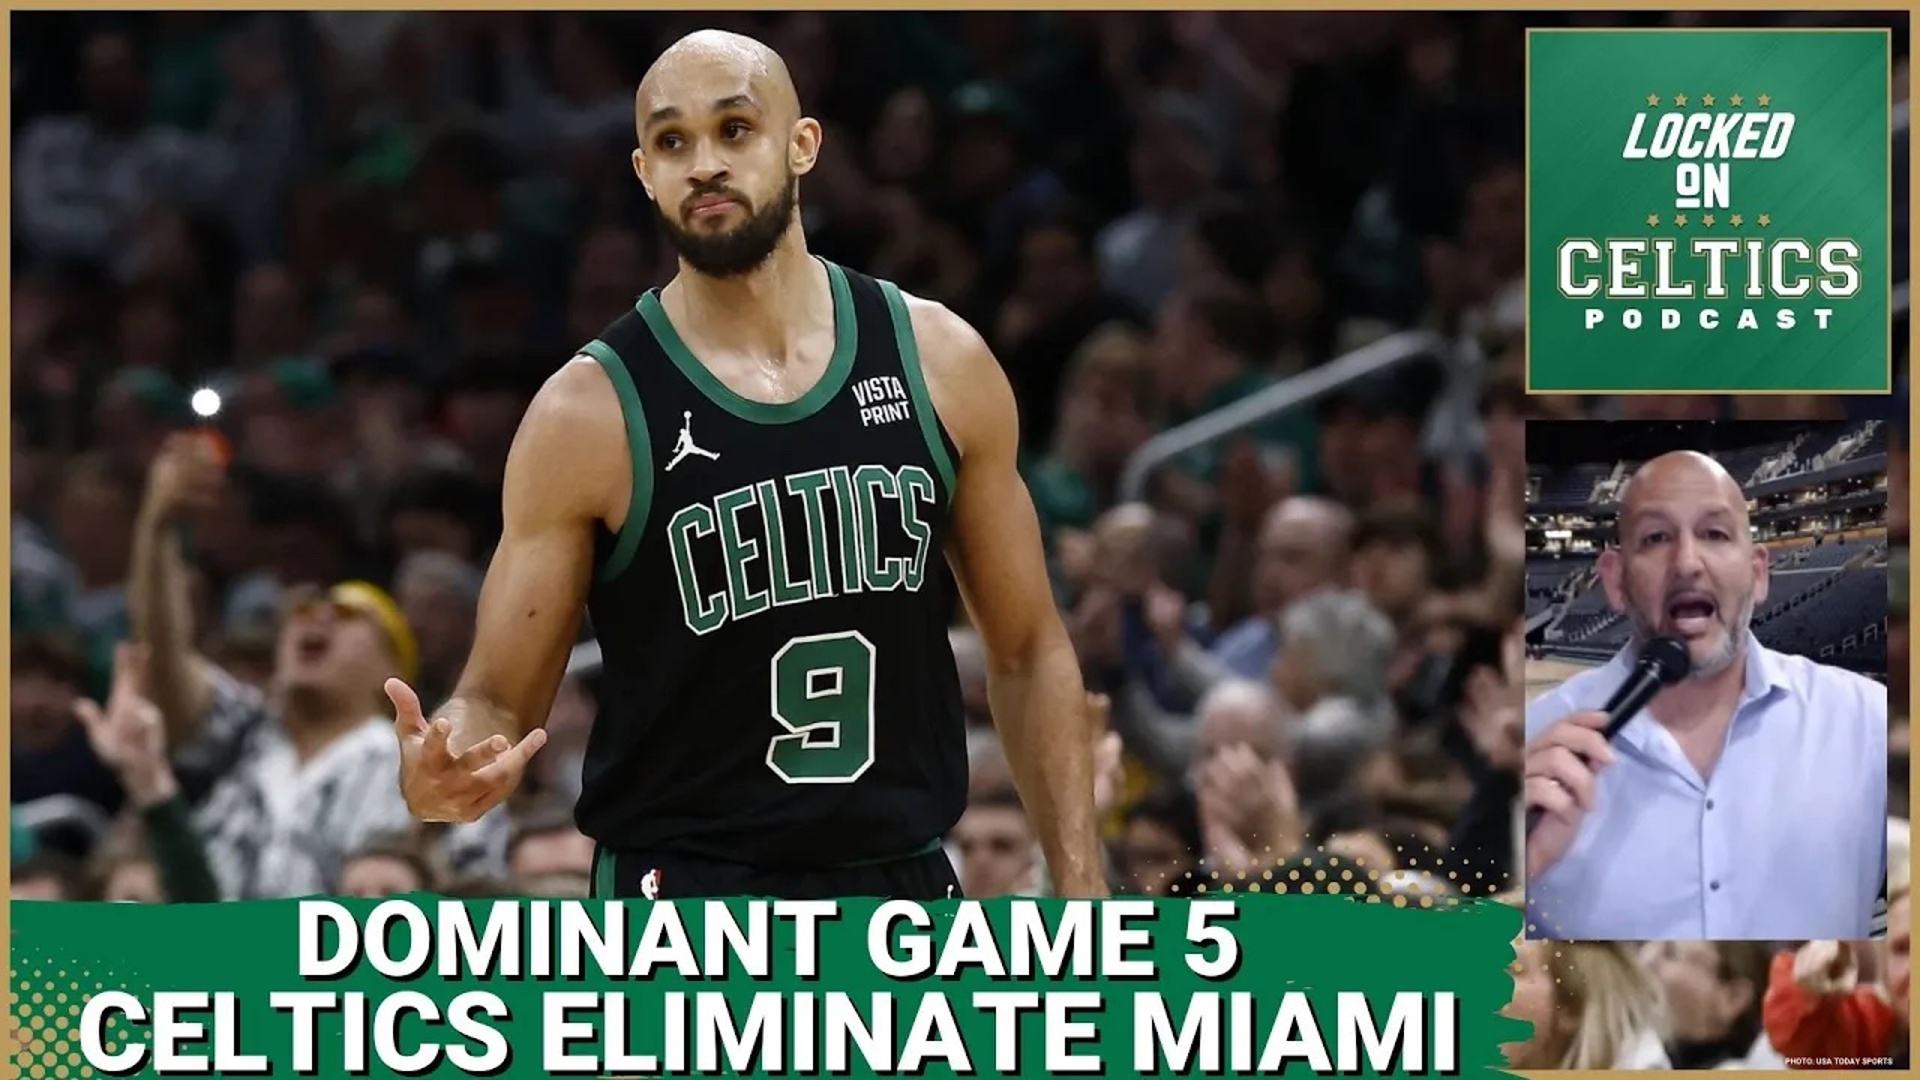 The Celtics came out strong and stomped the Miami Heat, winning Game 5 by 34 points and moving on to the Conference Semifinals.